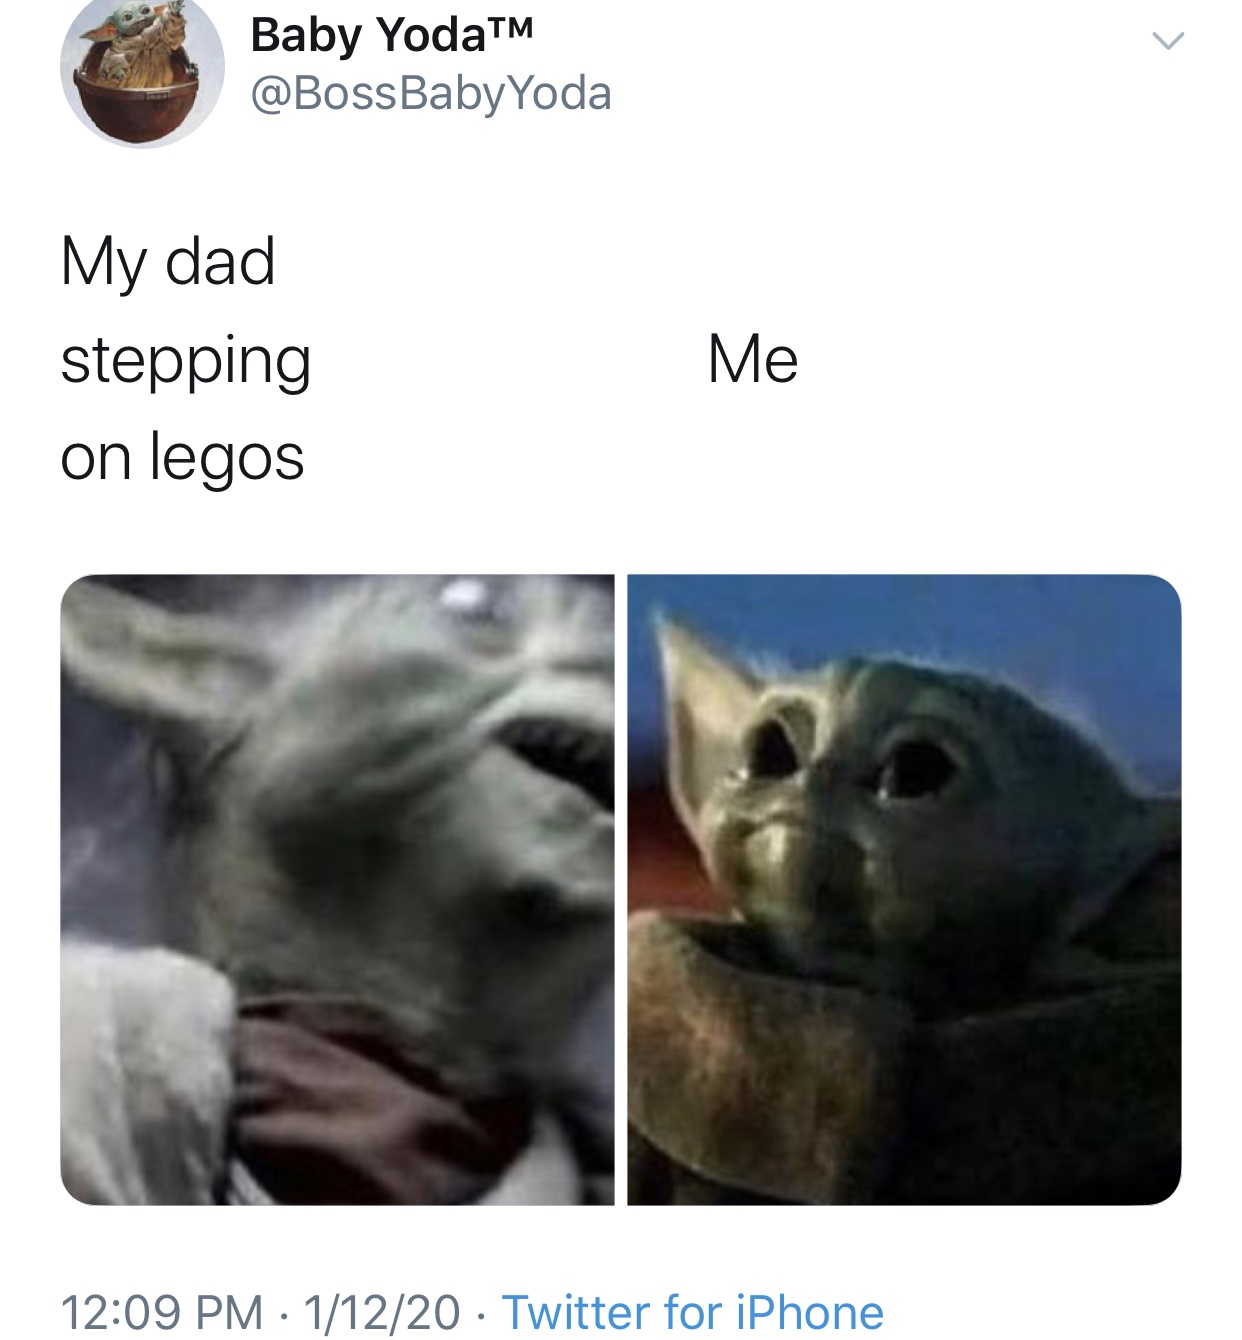 imgur baby yoda meme - Baby YodaTM My dad stepping on legos Me 11220 Twitter for iPhone